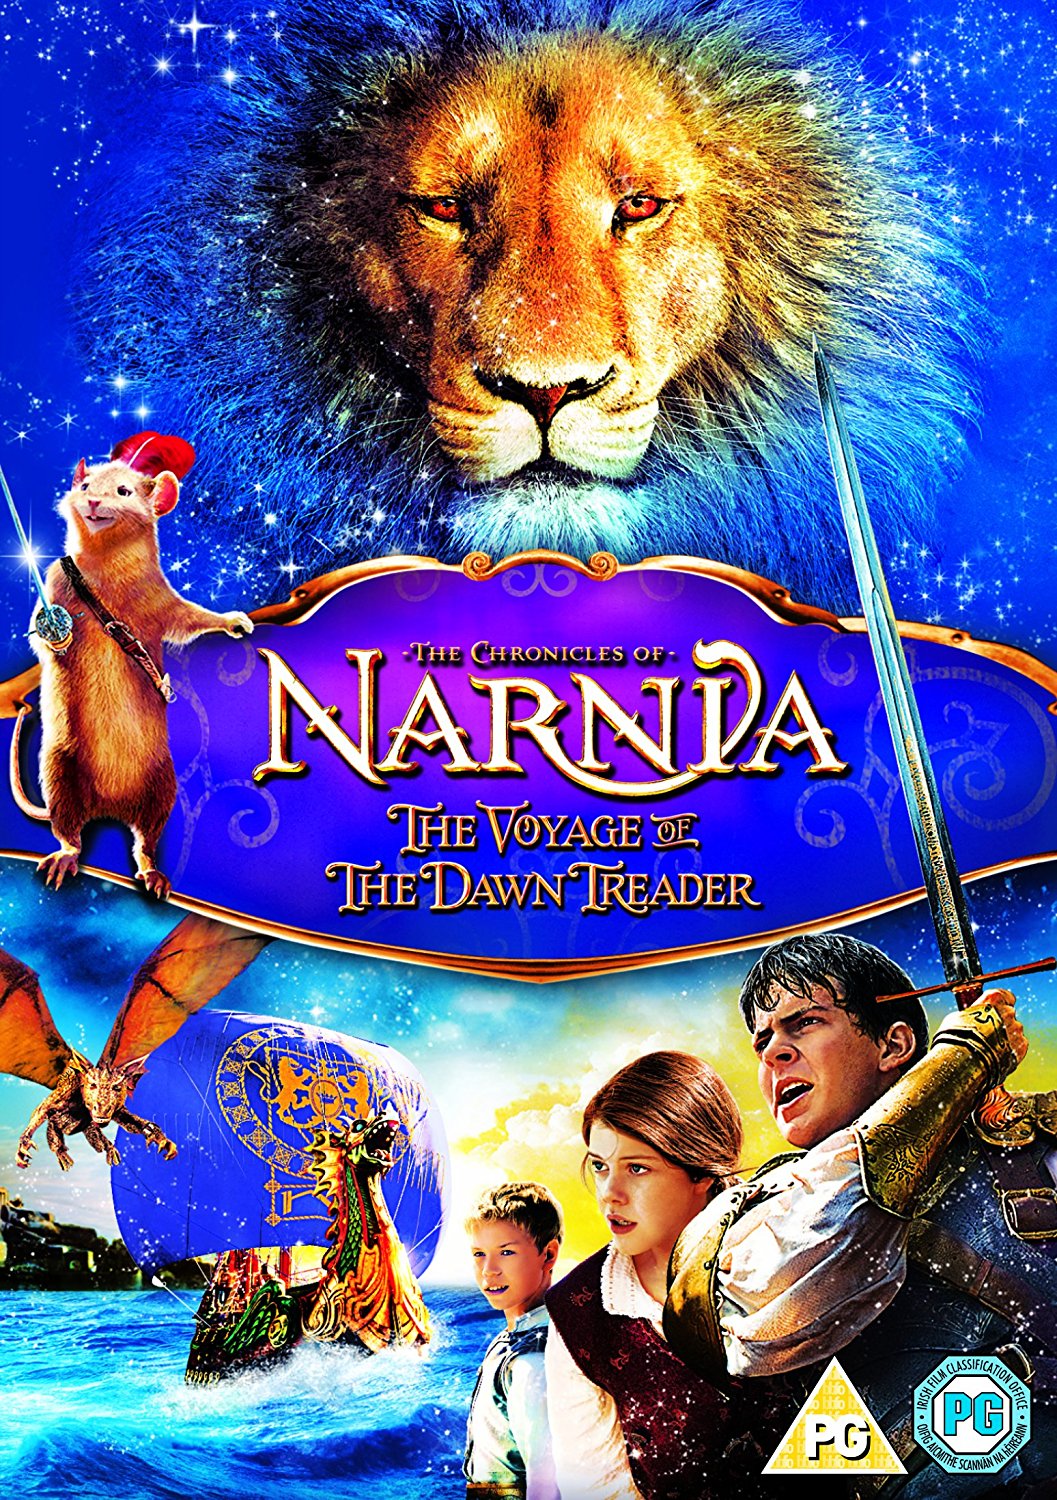 The chronicles of Narnia : Voyage of the Dawn Treader